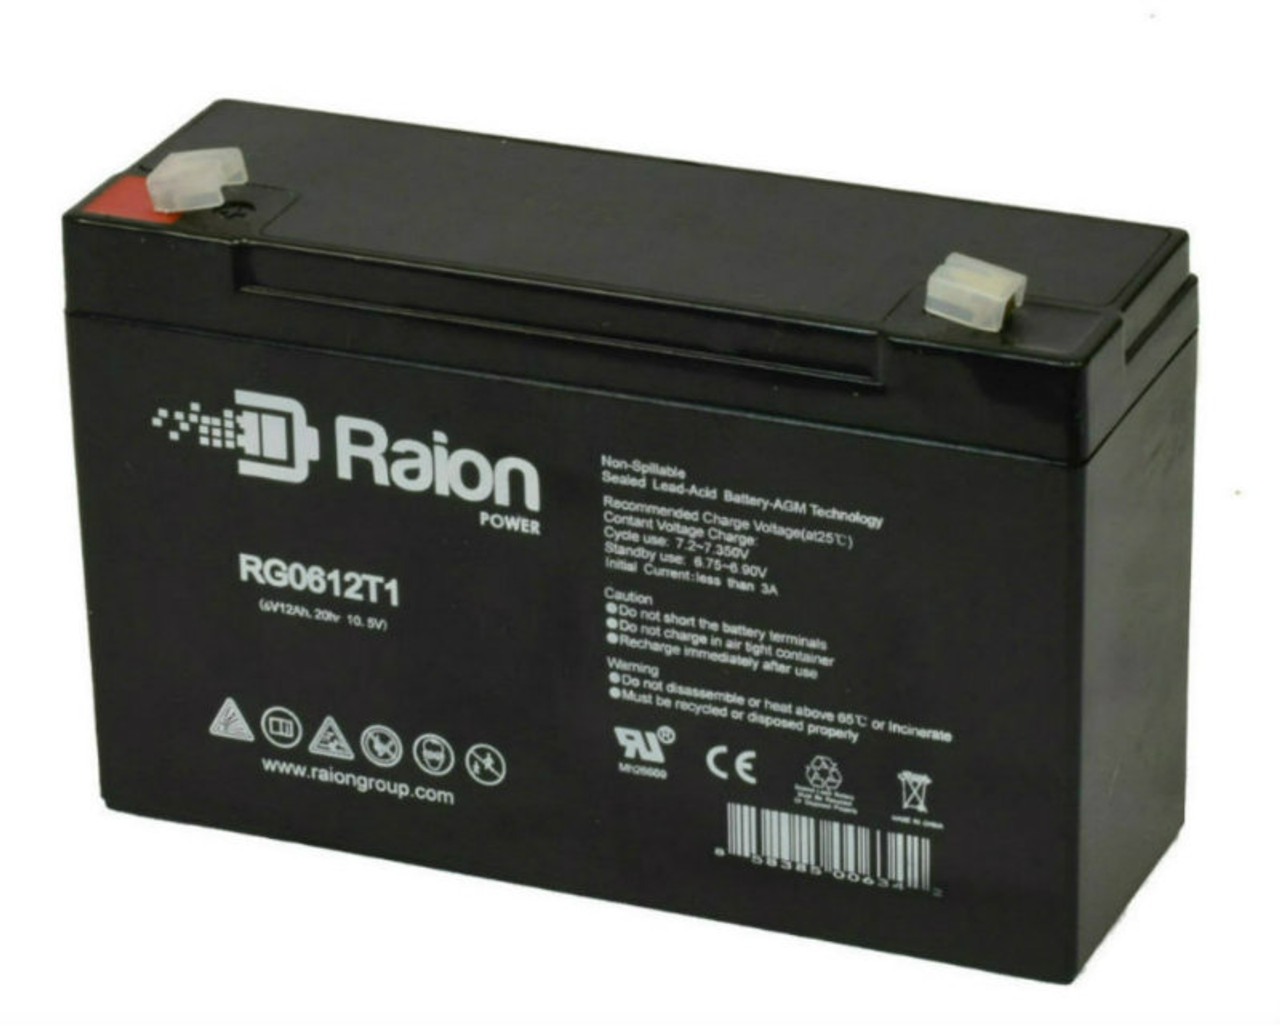 Raion Power RG06120T1 Replacement Battery for Power Patrol SLA0959